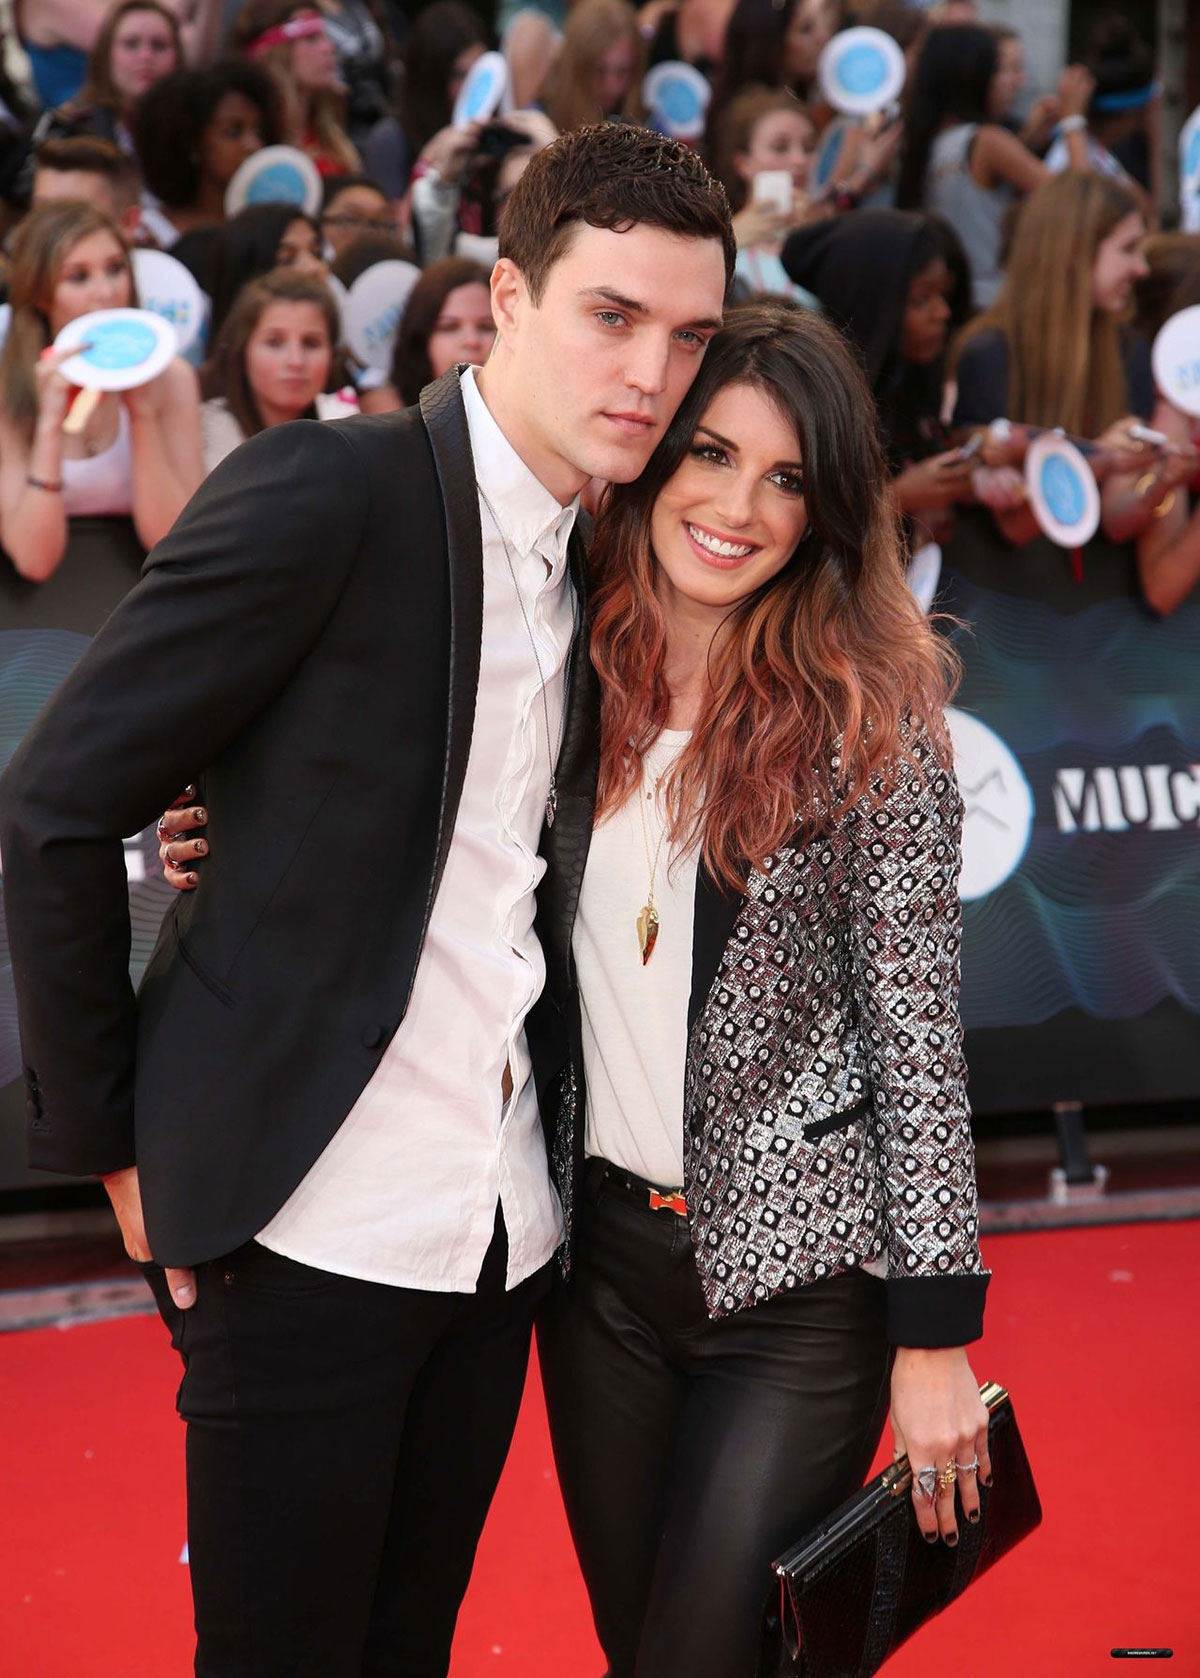 Shenae Grimes attends the 2014 MuchMusic Video Awards